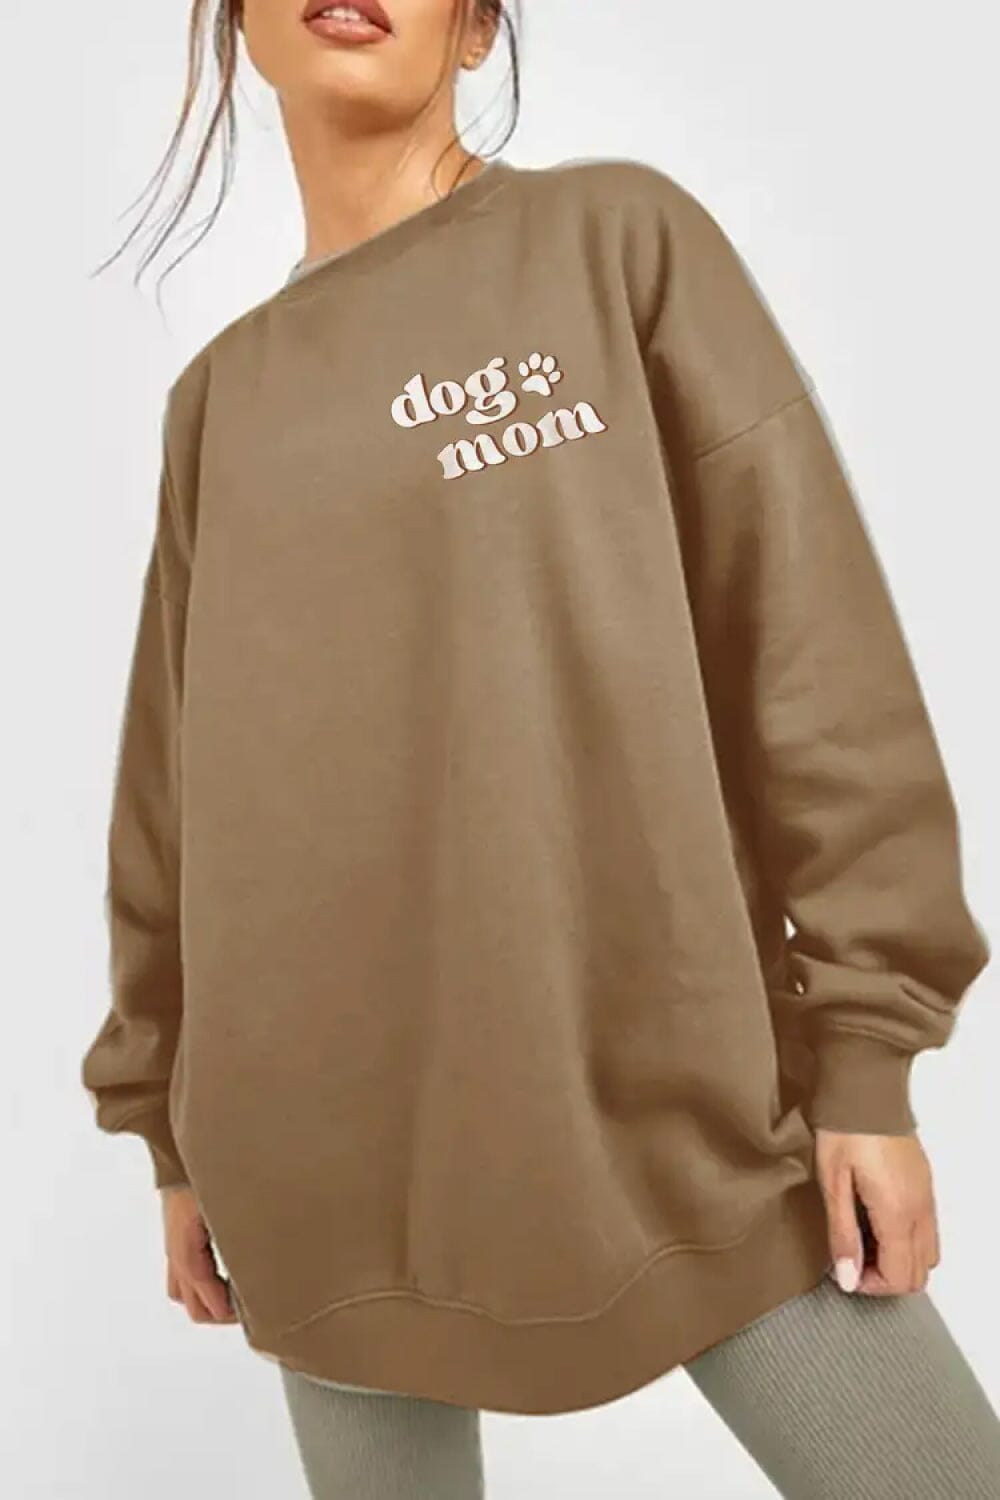 Simply Love Full Size Round Neck Dropped Shoulder DOG MOM Graphic Sweatshirt - Sydney So Sweet